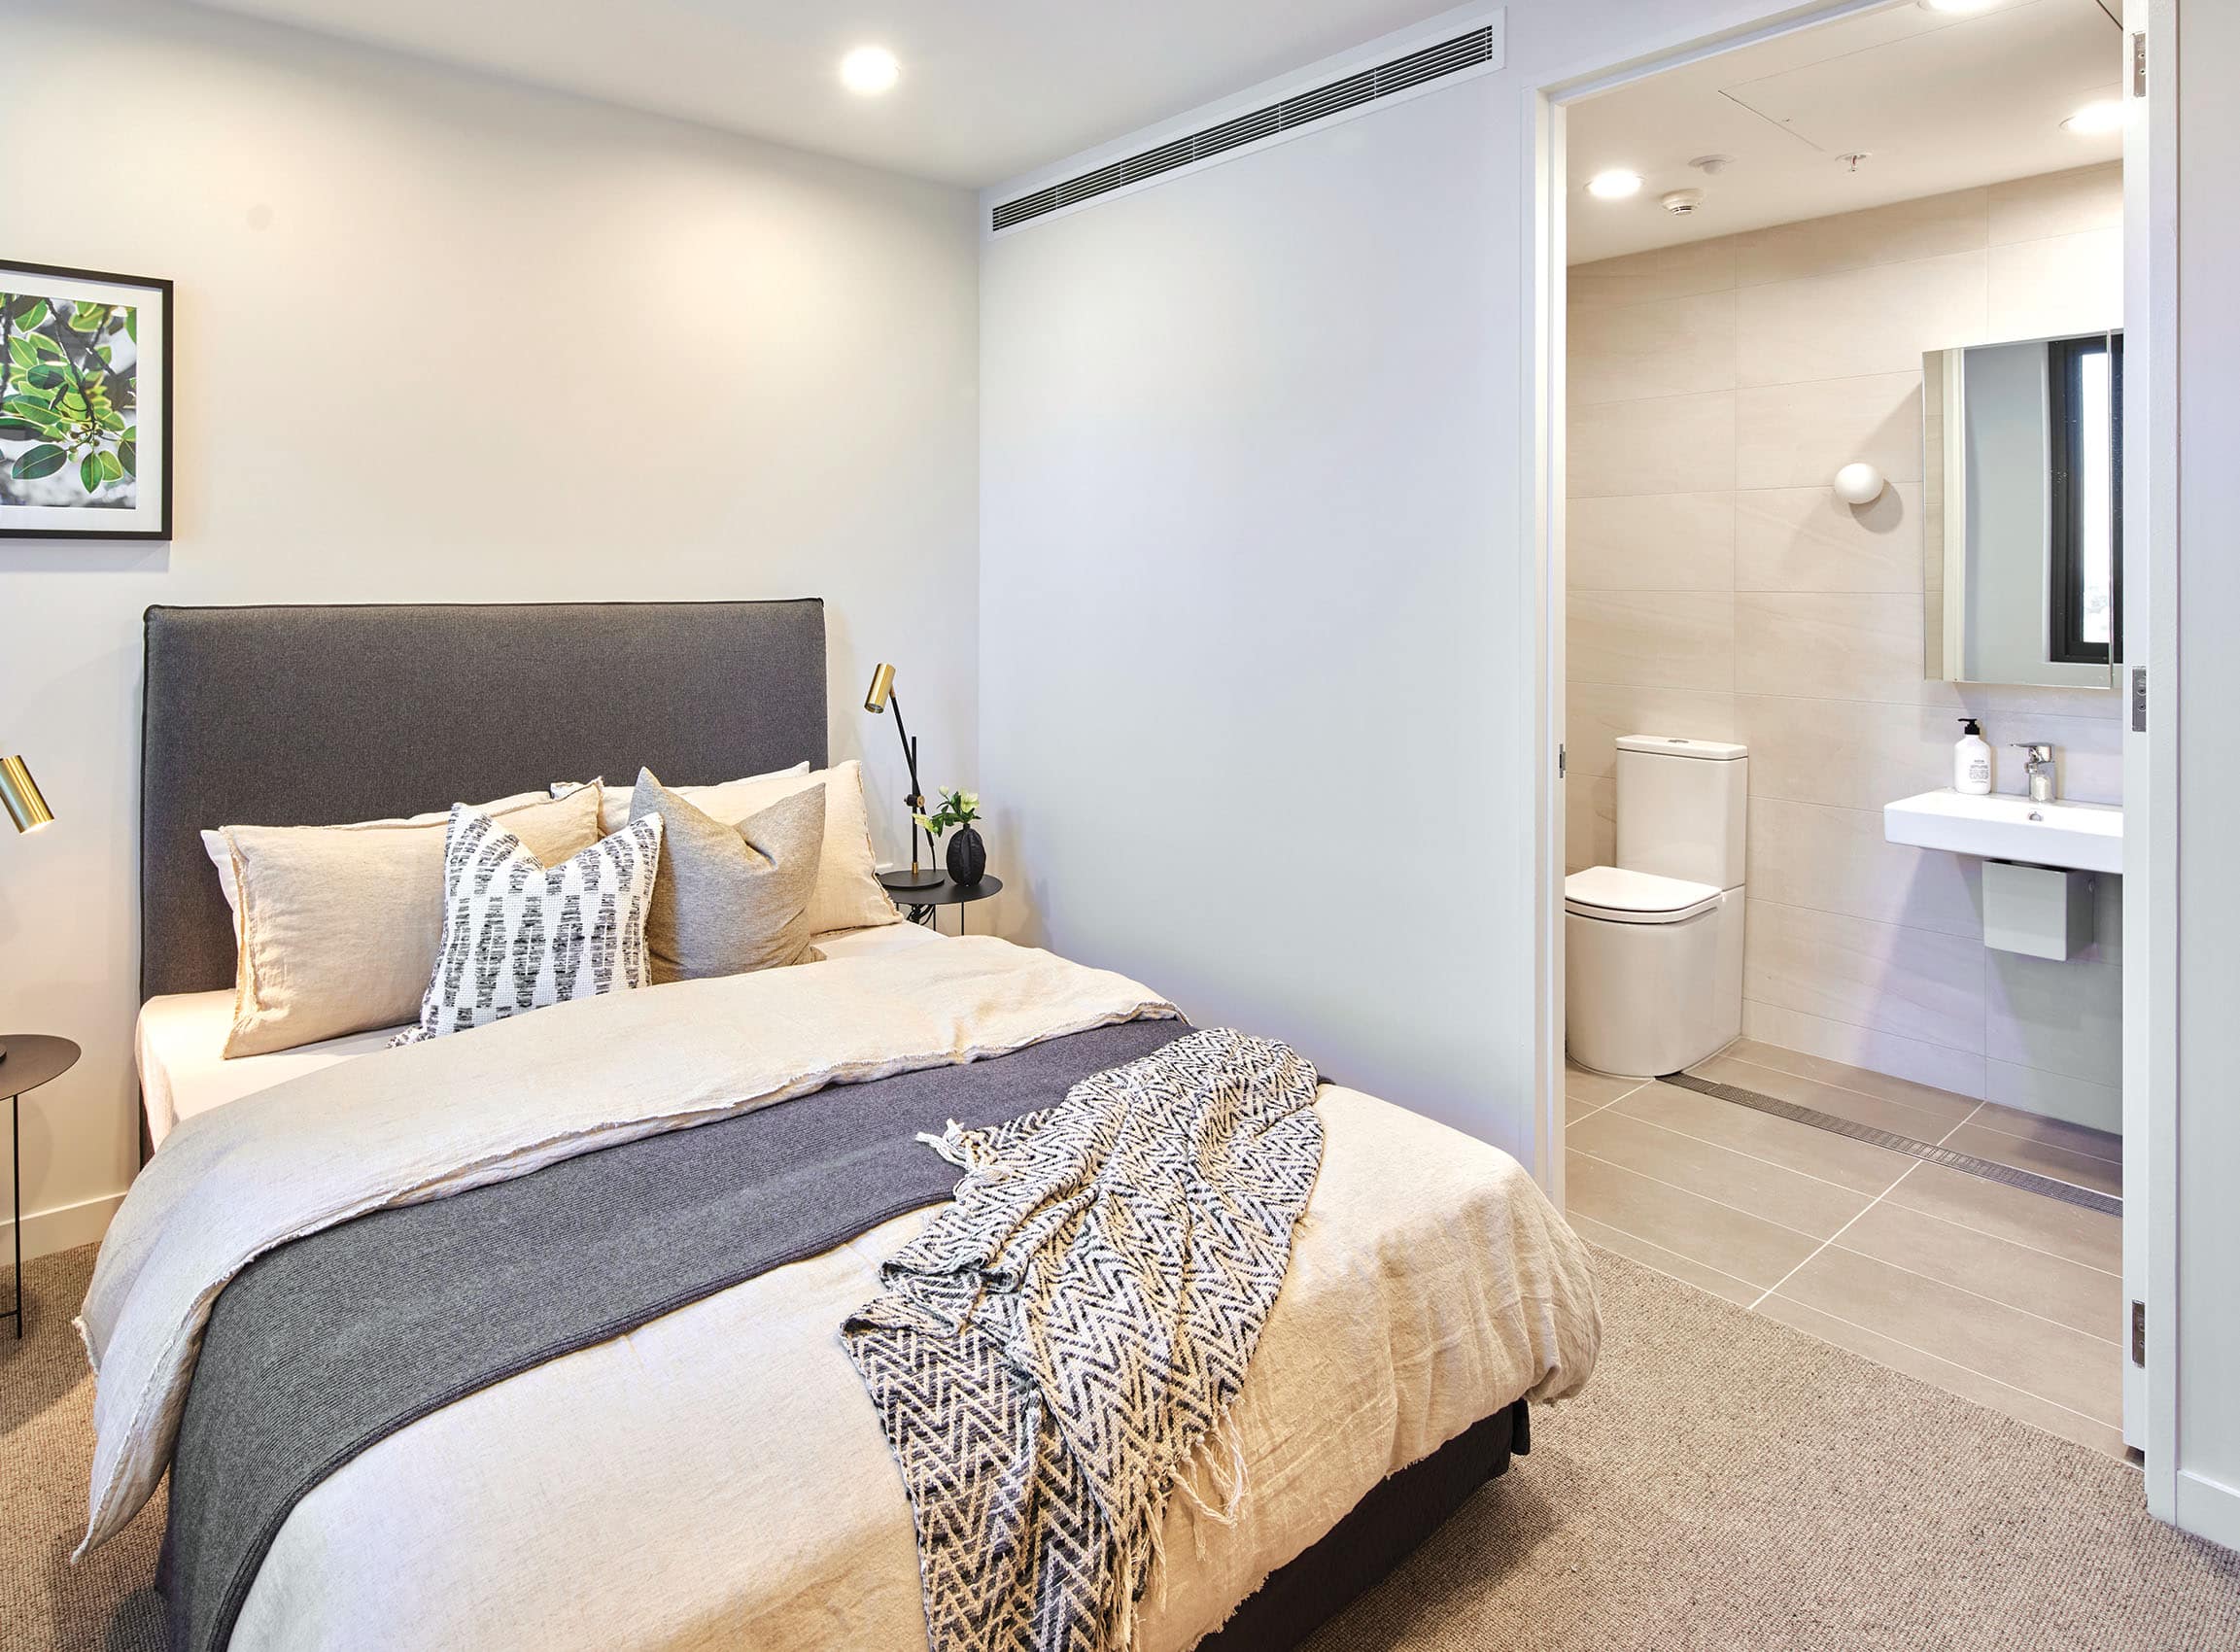 Thoughtfully crafted, tranquil spaces with easy bathroom access.